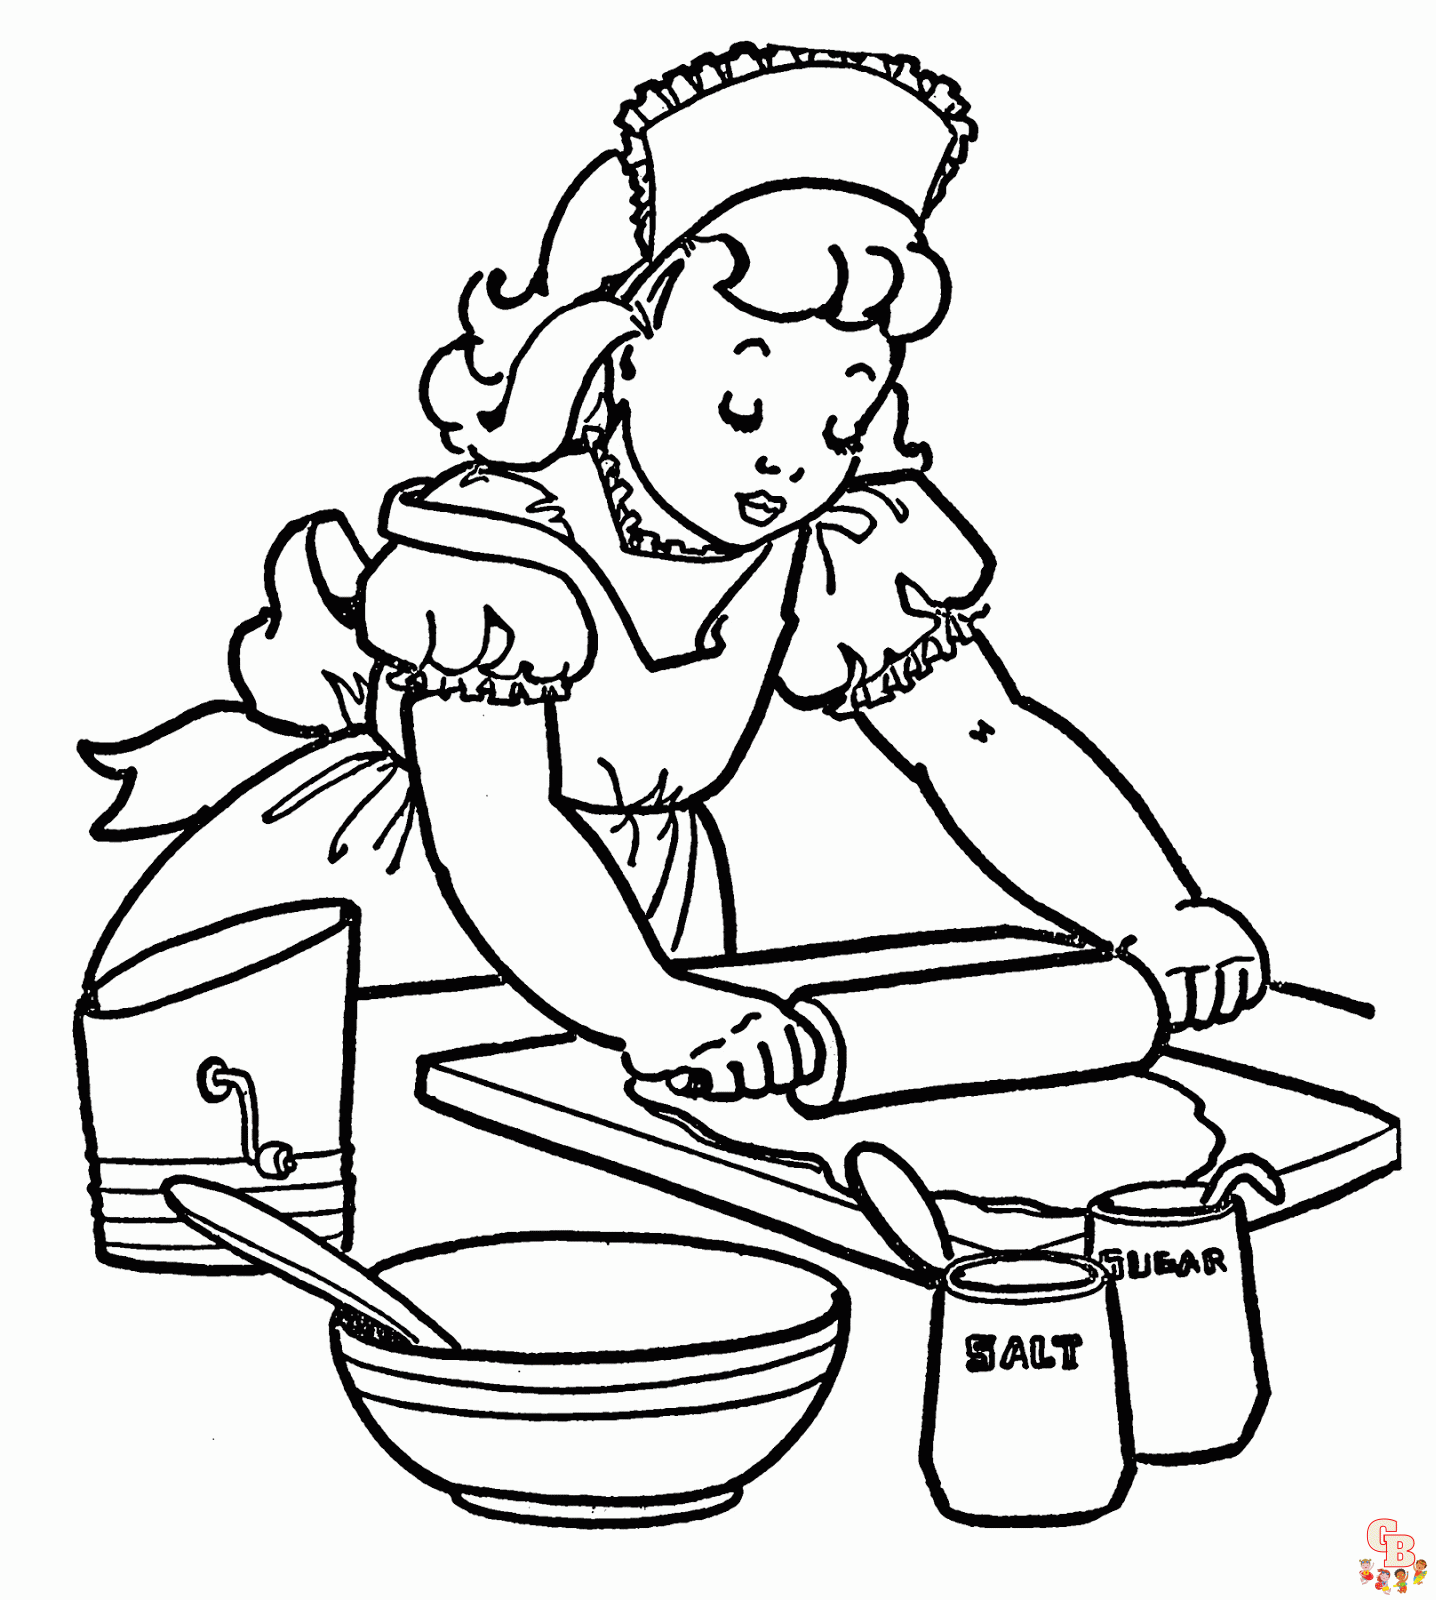 https://gbcoloring.com/wp-content/uploads/2023/03/cooking-coloring-pages-1.gif